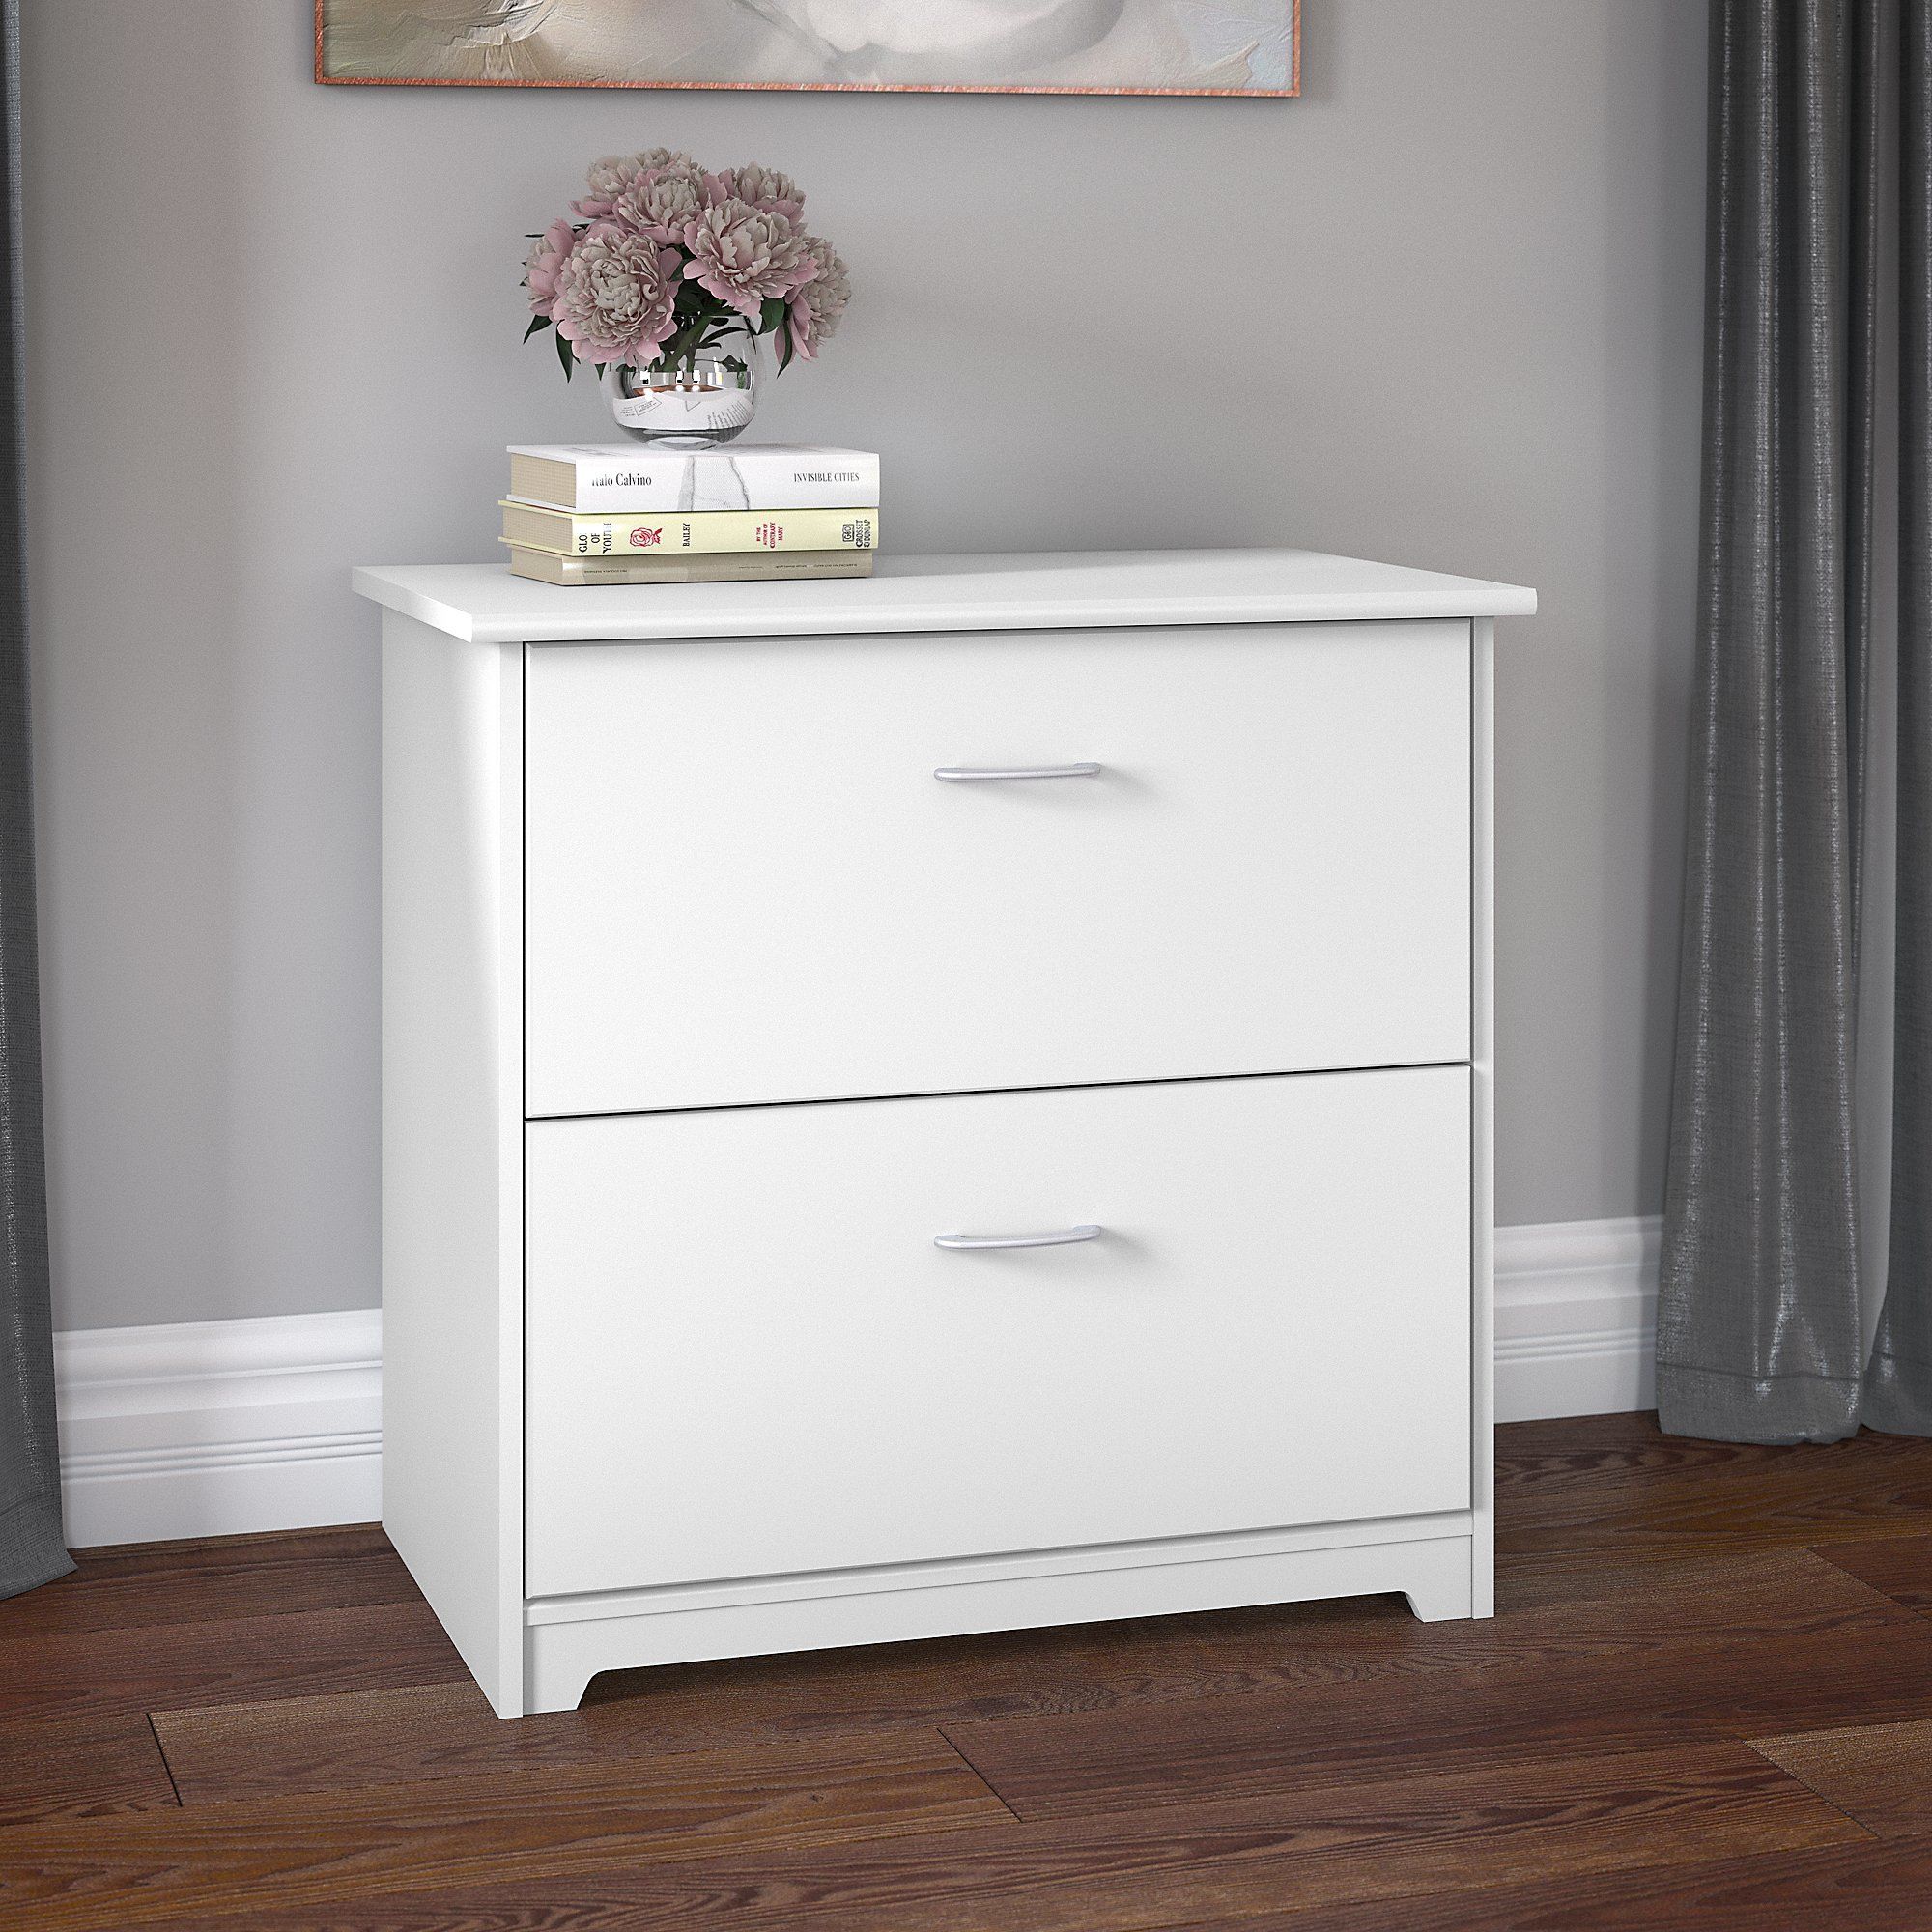 2 Drawer Lateral File Cabinet In White With White Traditional Desks Hutch With Light (View 13 of 15)